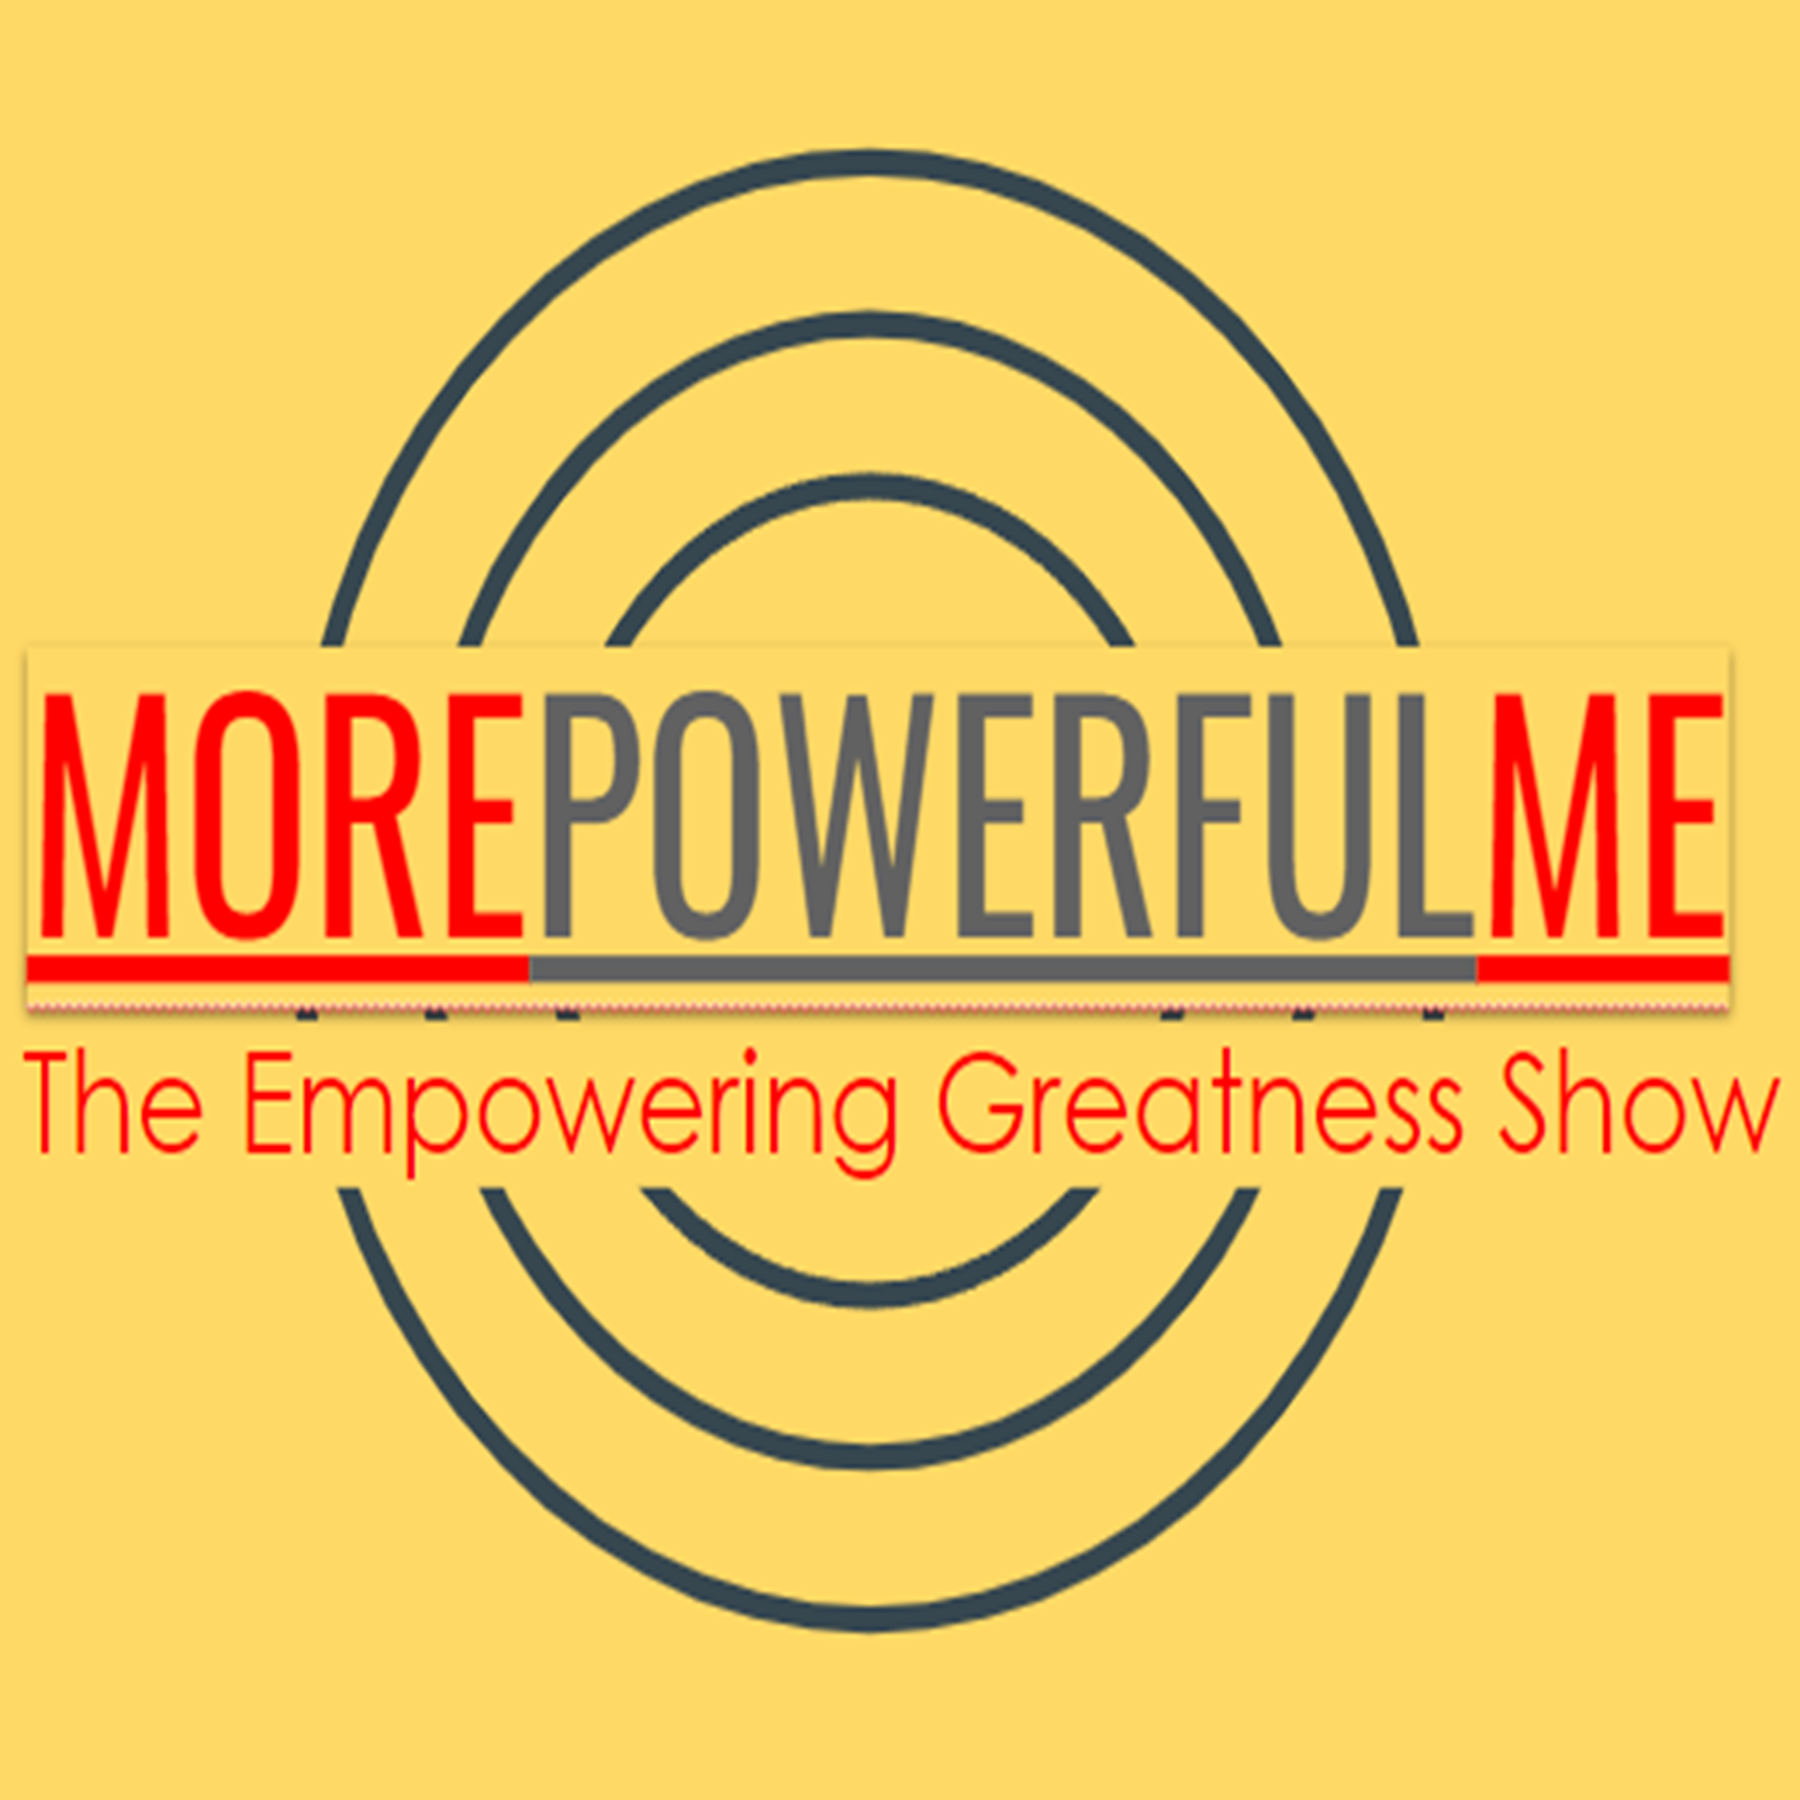 More Powerful Me, The Empowering Greatness Show